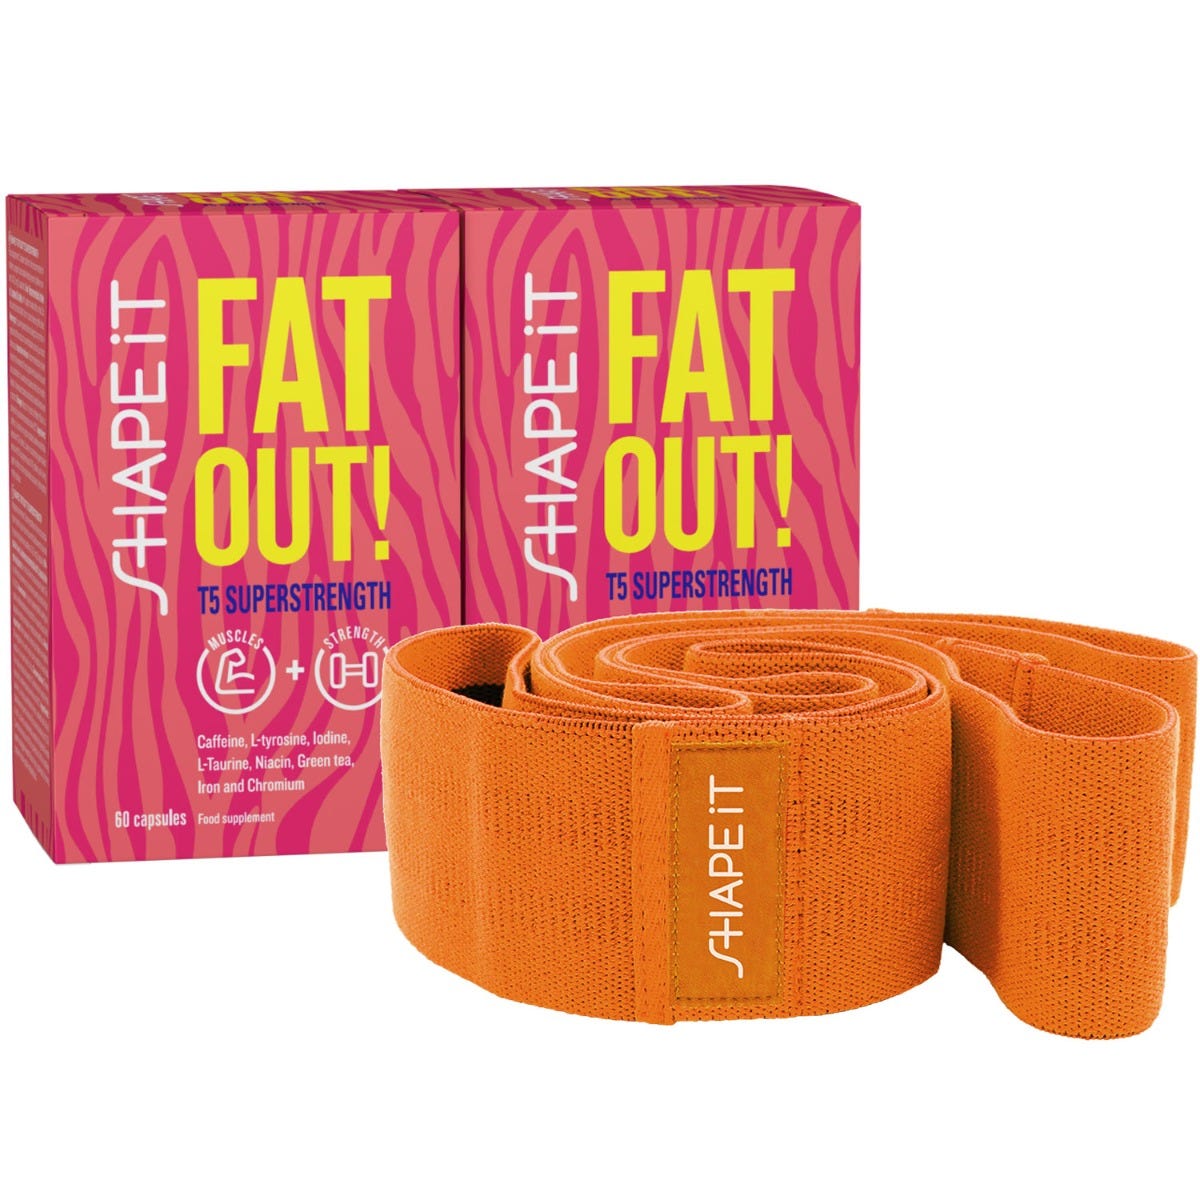 Fat OUT T5 Superstrength 2-Pack + Exercise Band.